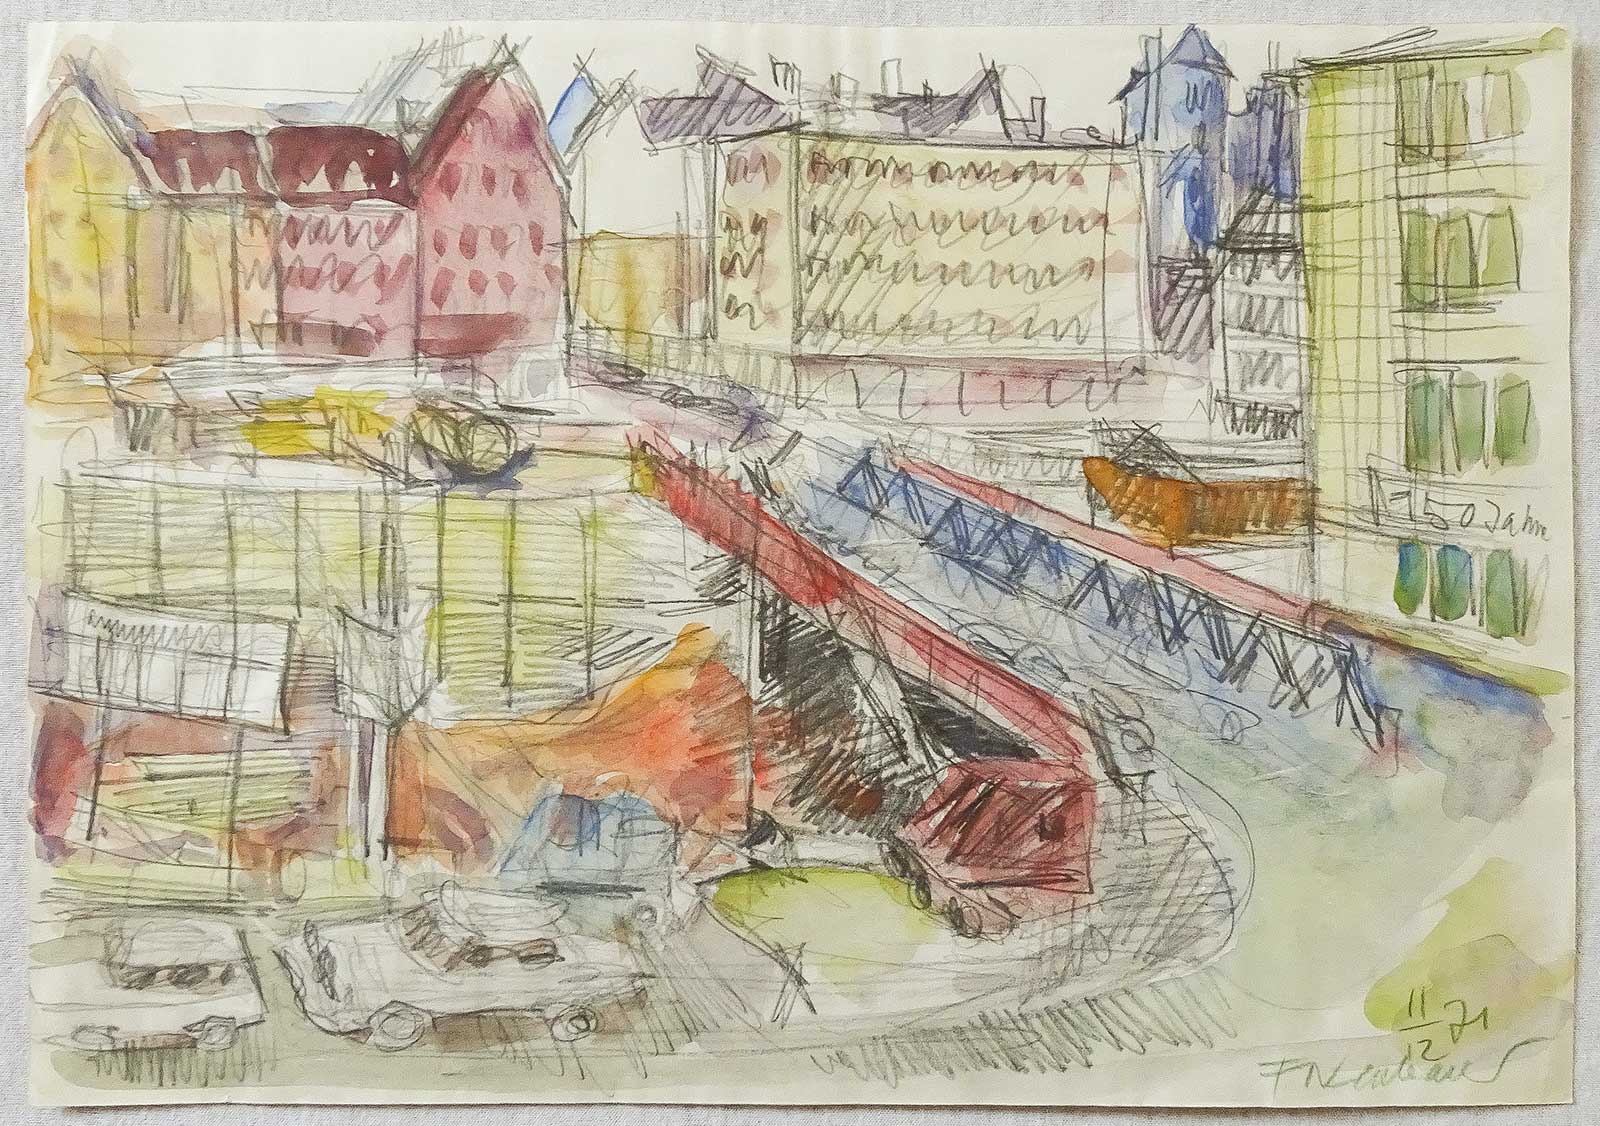 Construction of the Subway | pencil colored | Friedrich Neubauer